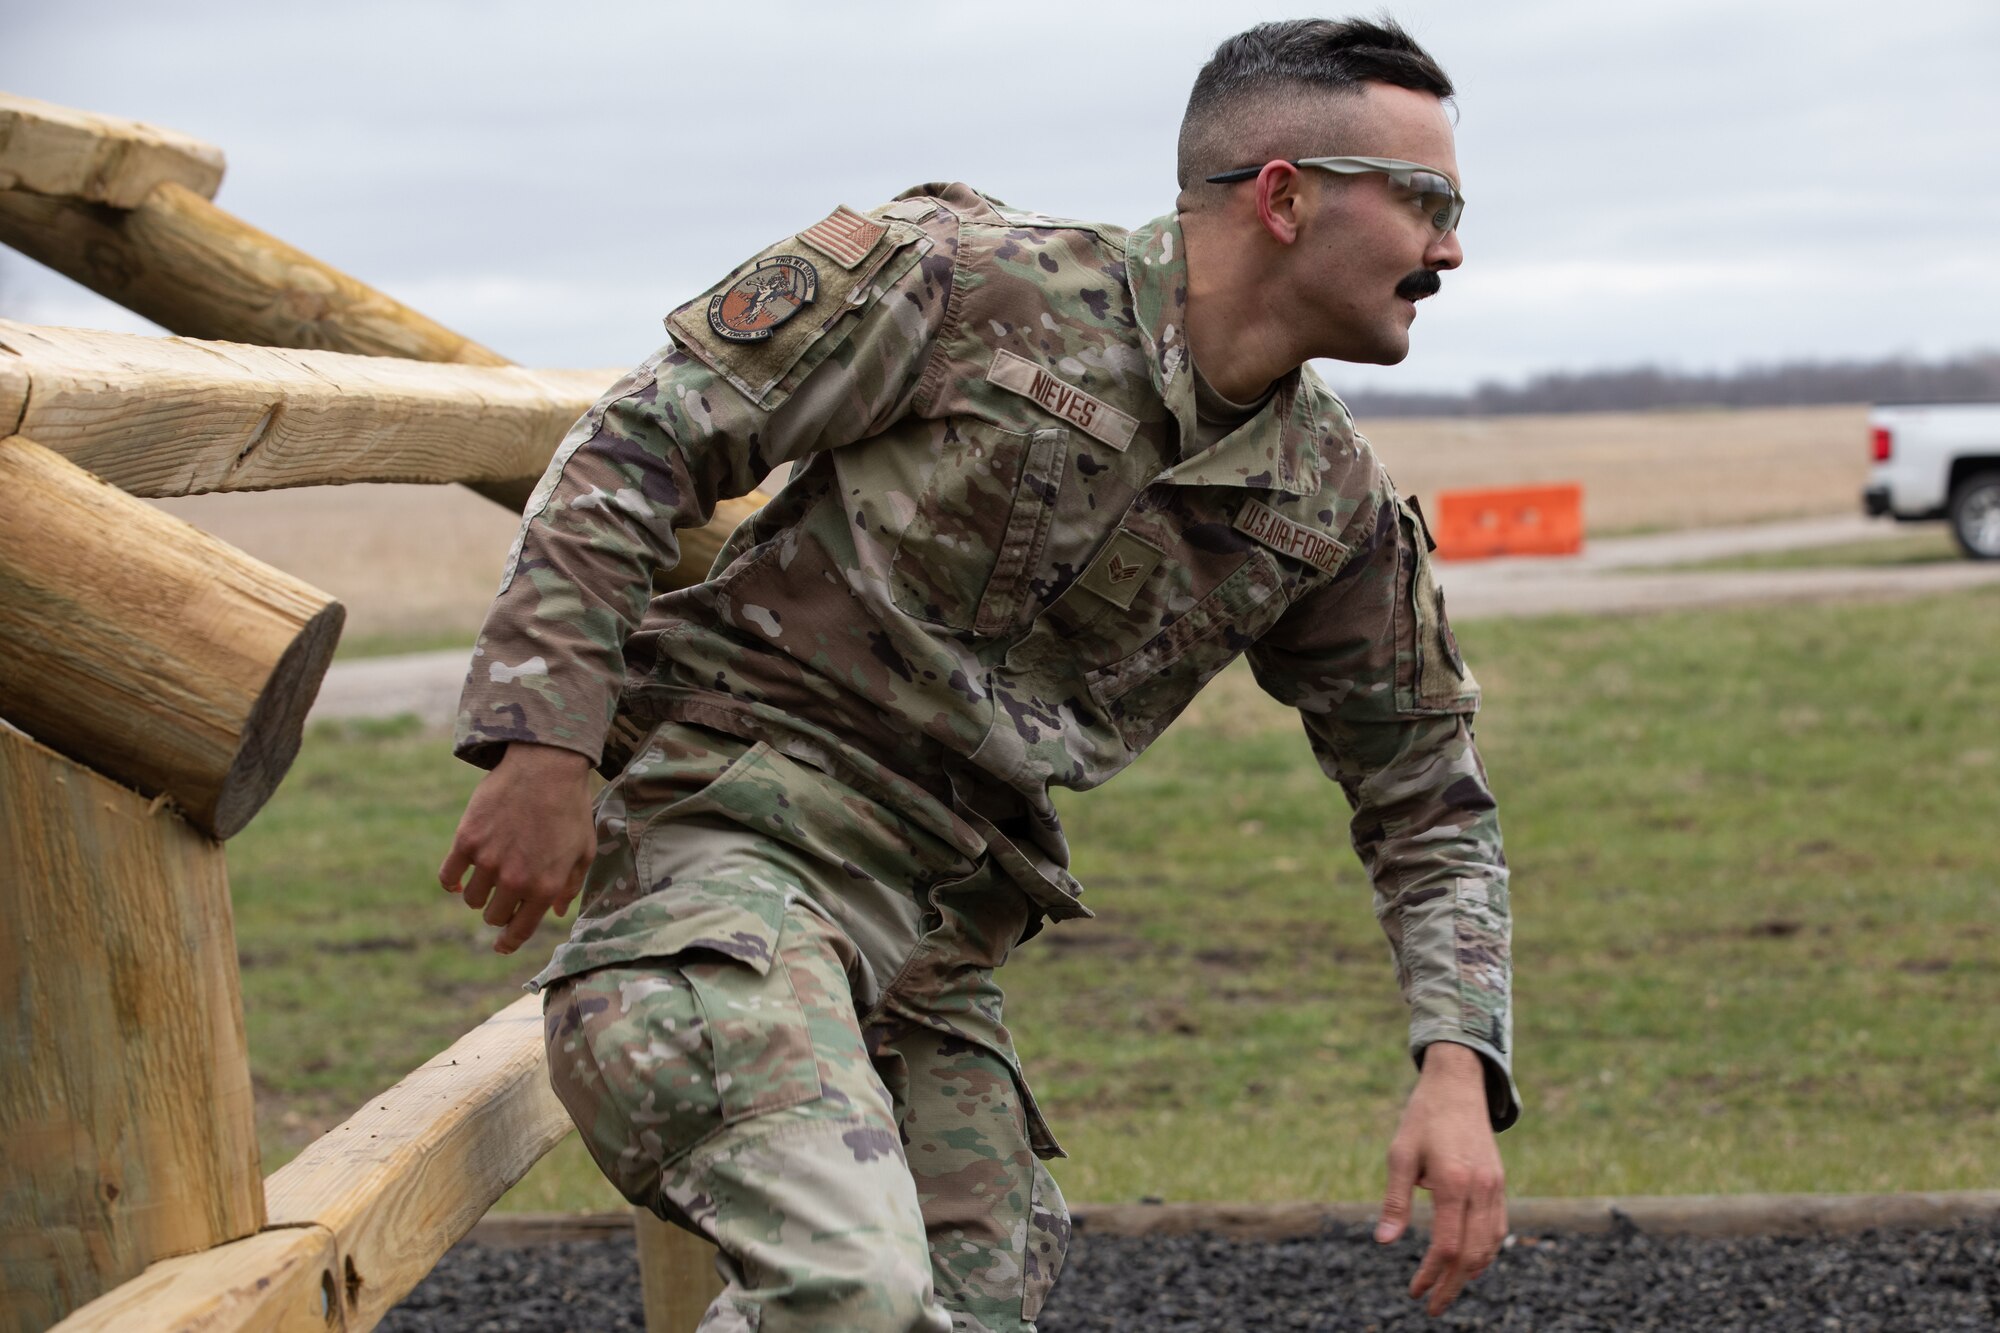 Senior Airman Evan Nieves, with the 122nd Fighter Wing, sprints through the obstacle course during the Best Warrior Competition at Camp Atterbury, Ind., March 17, 2023. Service members from the Indiana National Guard and the Slovakian armed forces tested basic Soldier skills like physical fitness, marksmanship and combat readiness in the three-day competition.